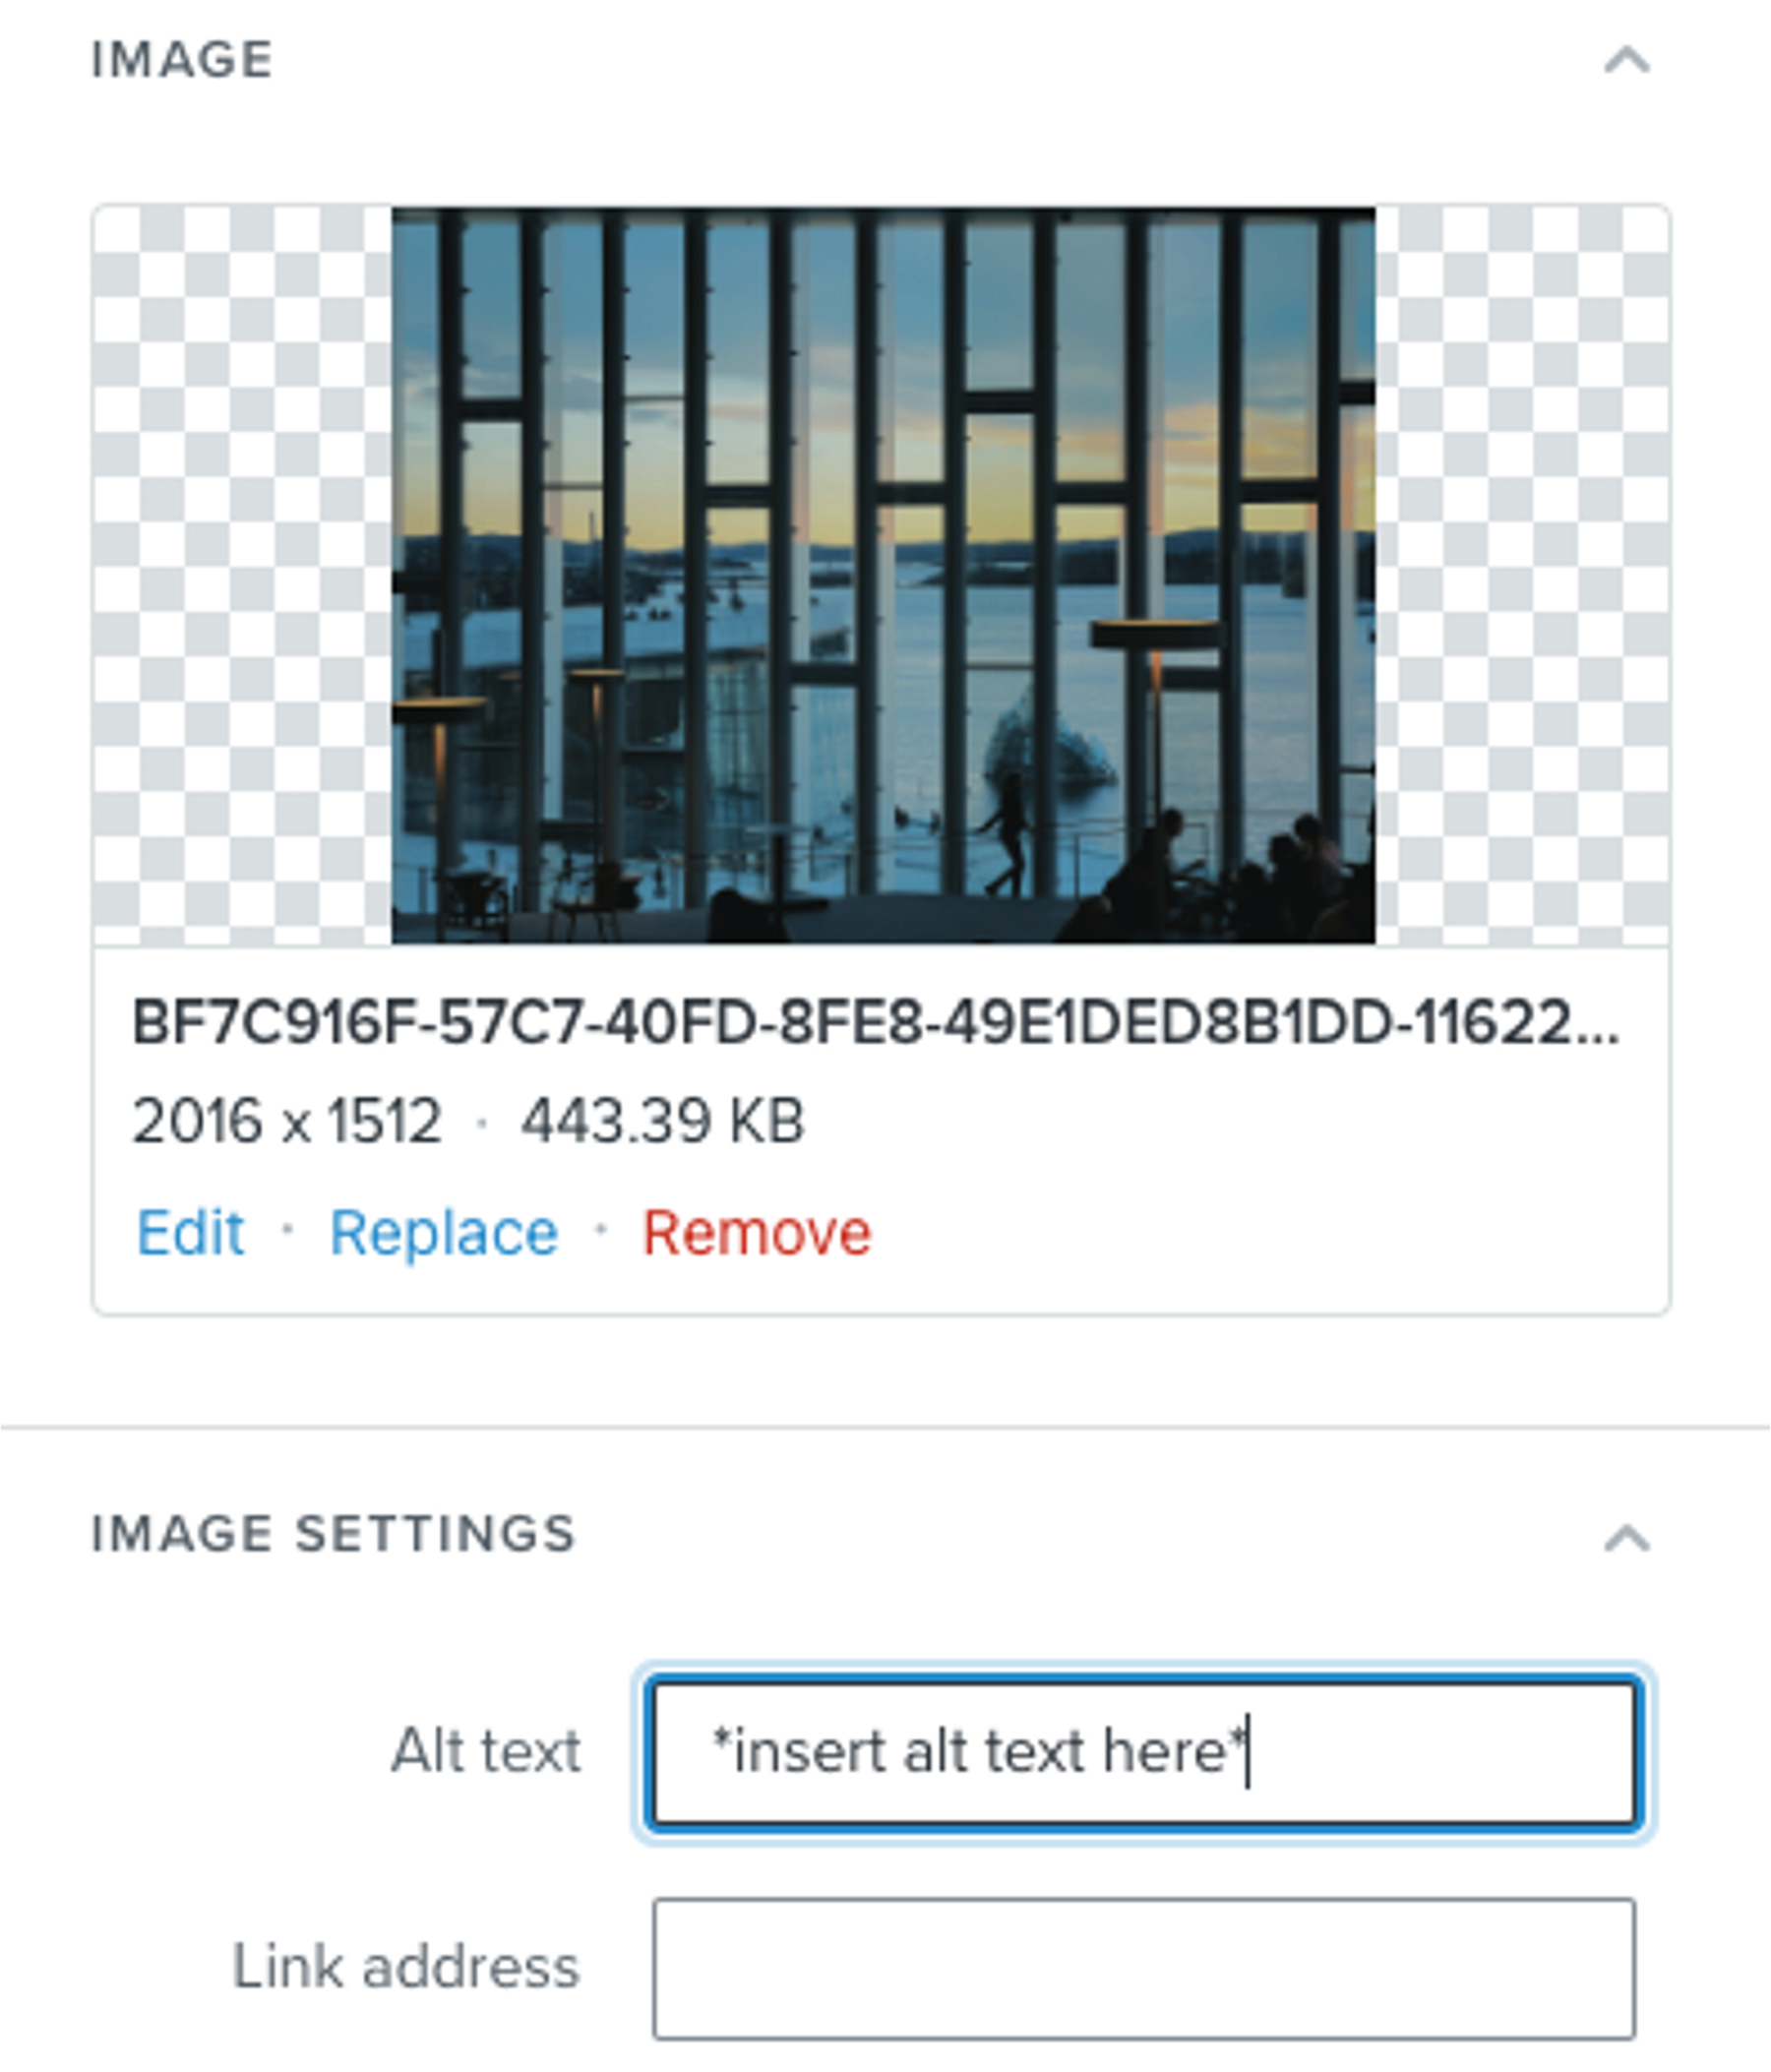 picture showing how and where to enter the alt text on image settings